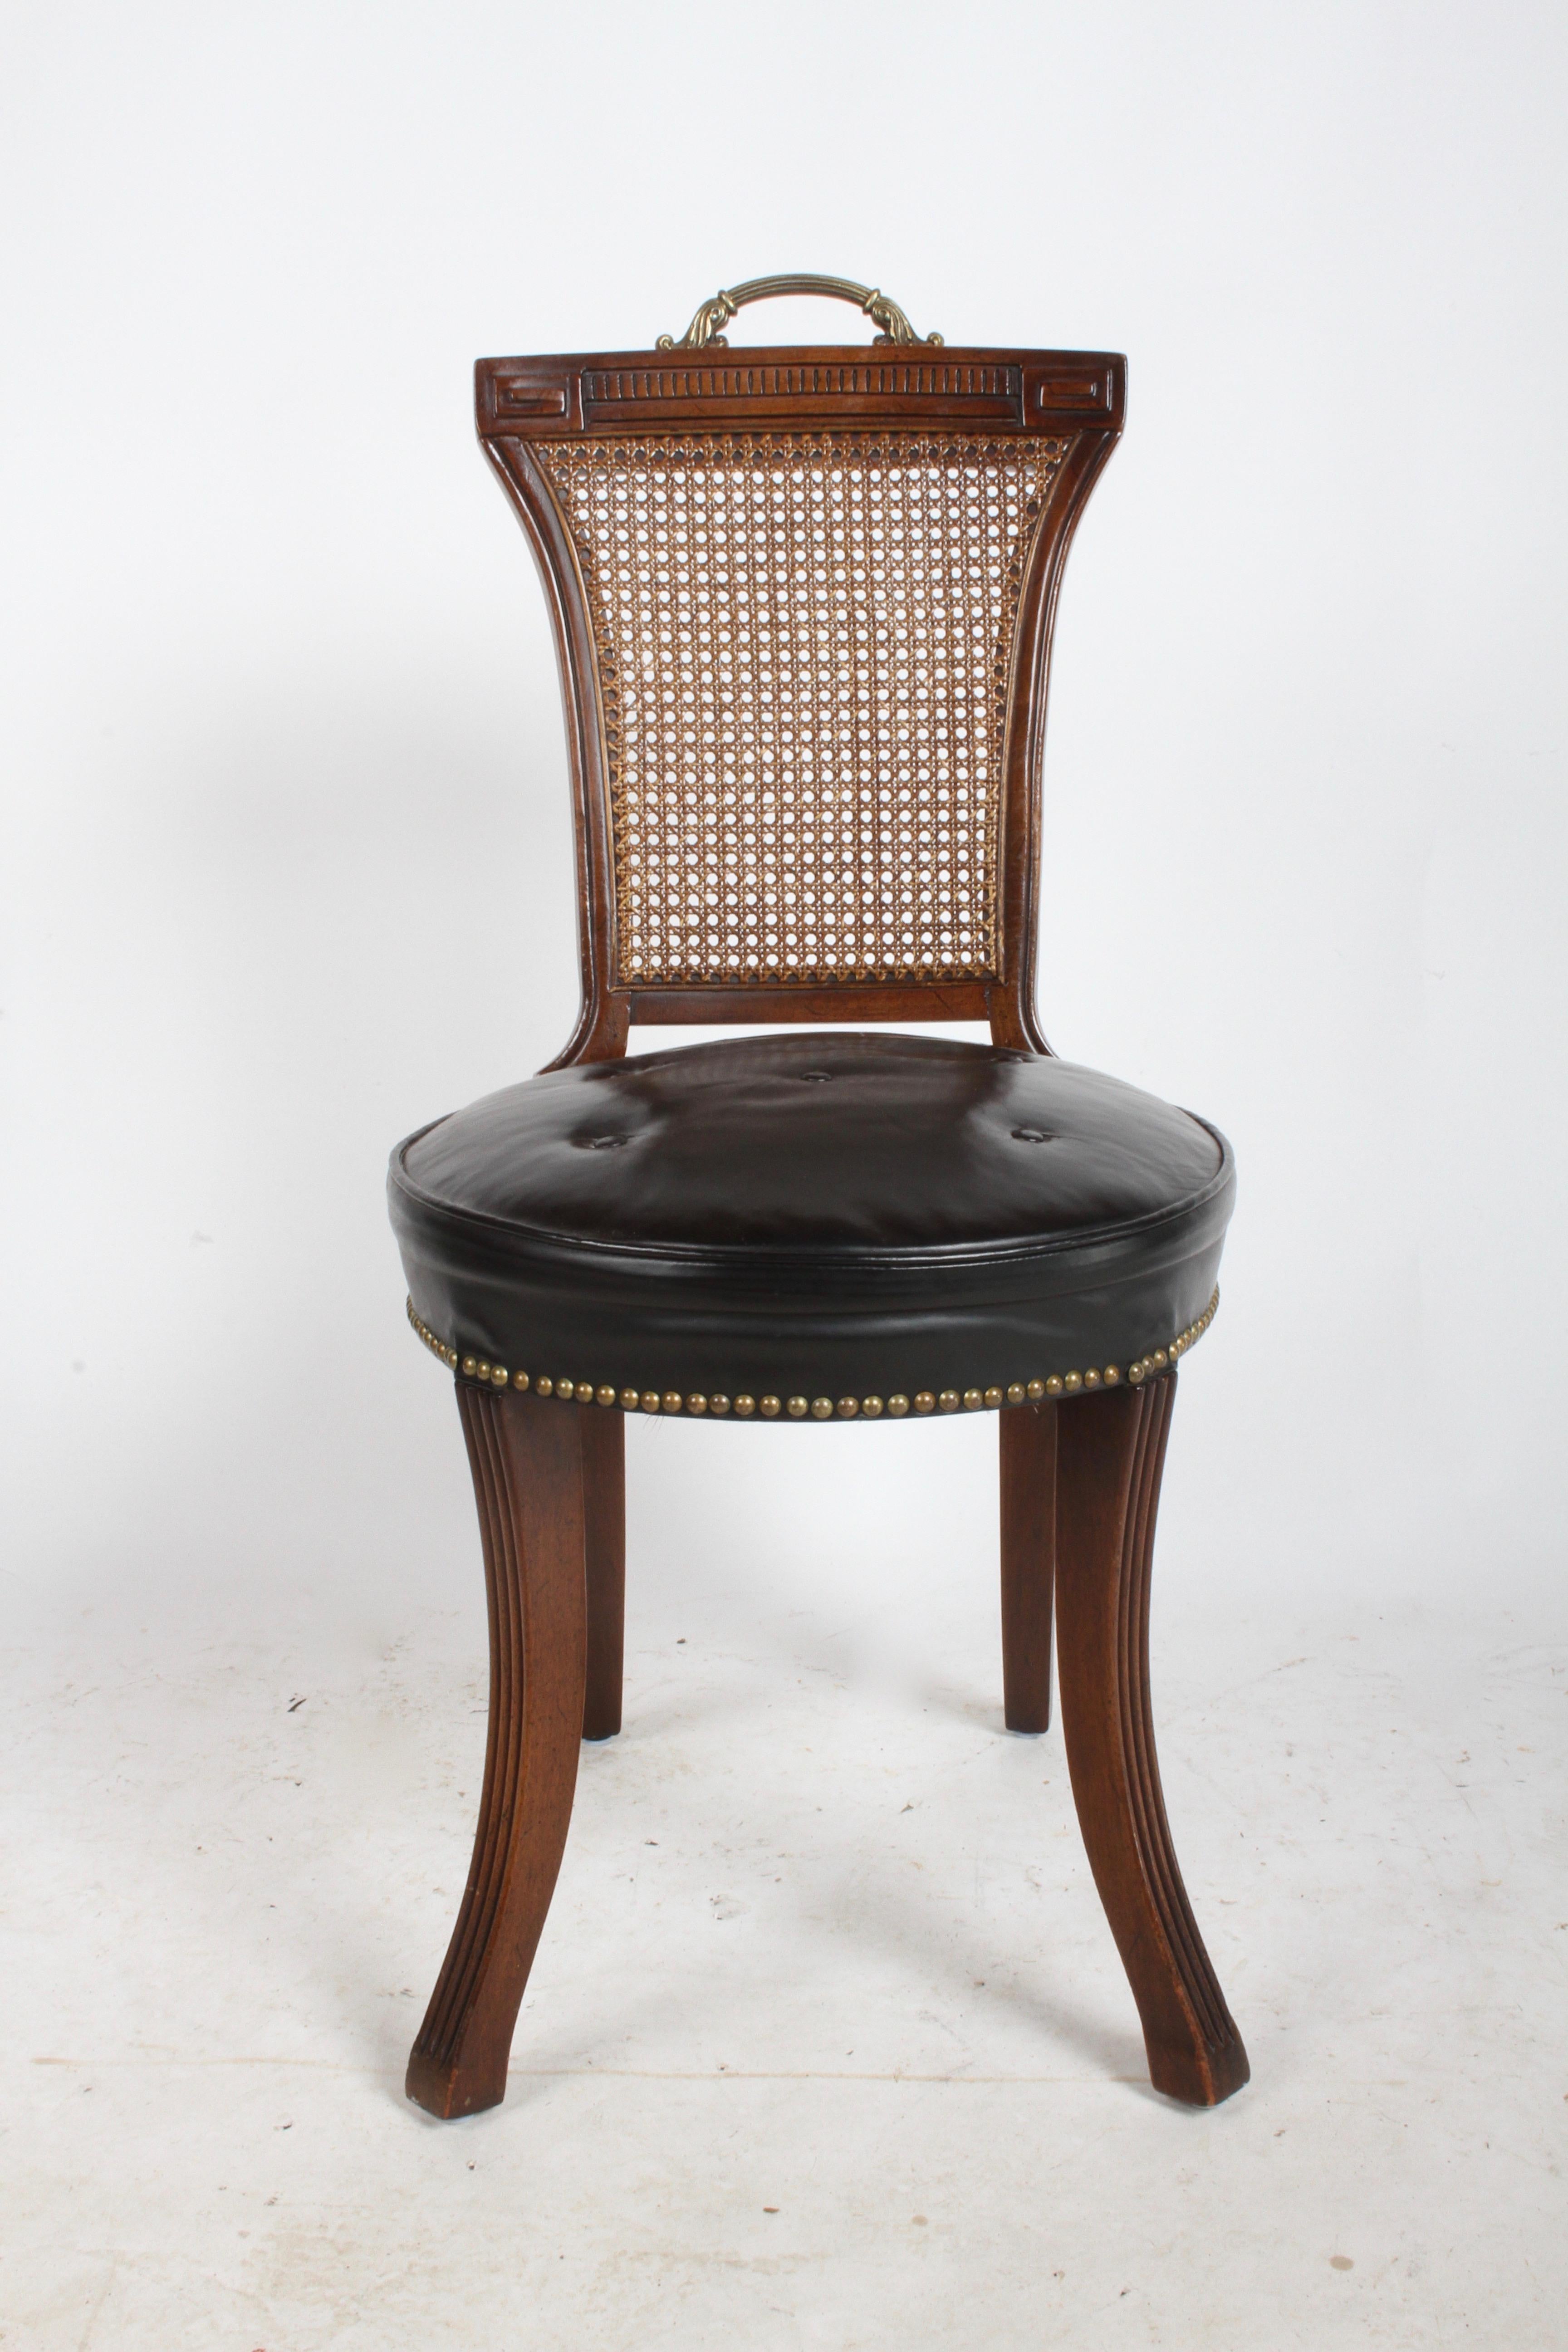 In the style of Grosfeld House mahogany frame desk chair with brass handle, caned back, Greek key design, splayed fluted legs and black leather seat. Original leather seat, has some stress marks, four buttons and brass tacks. Original finish, some